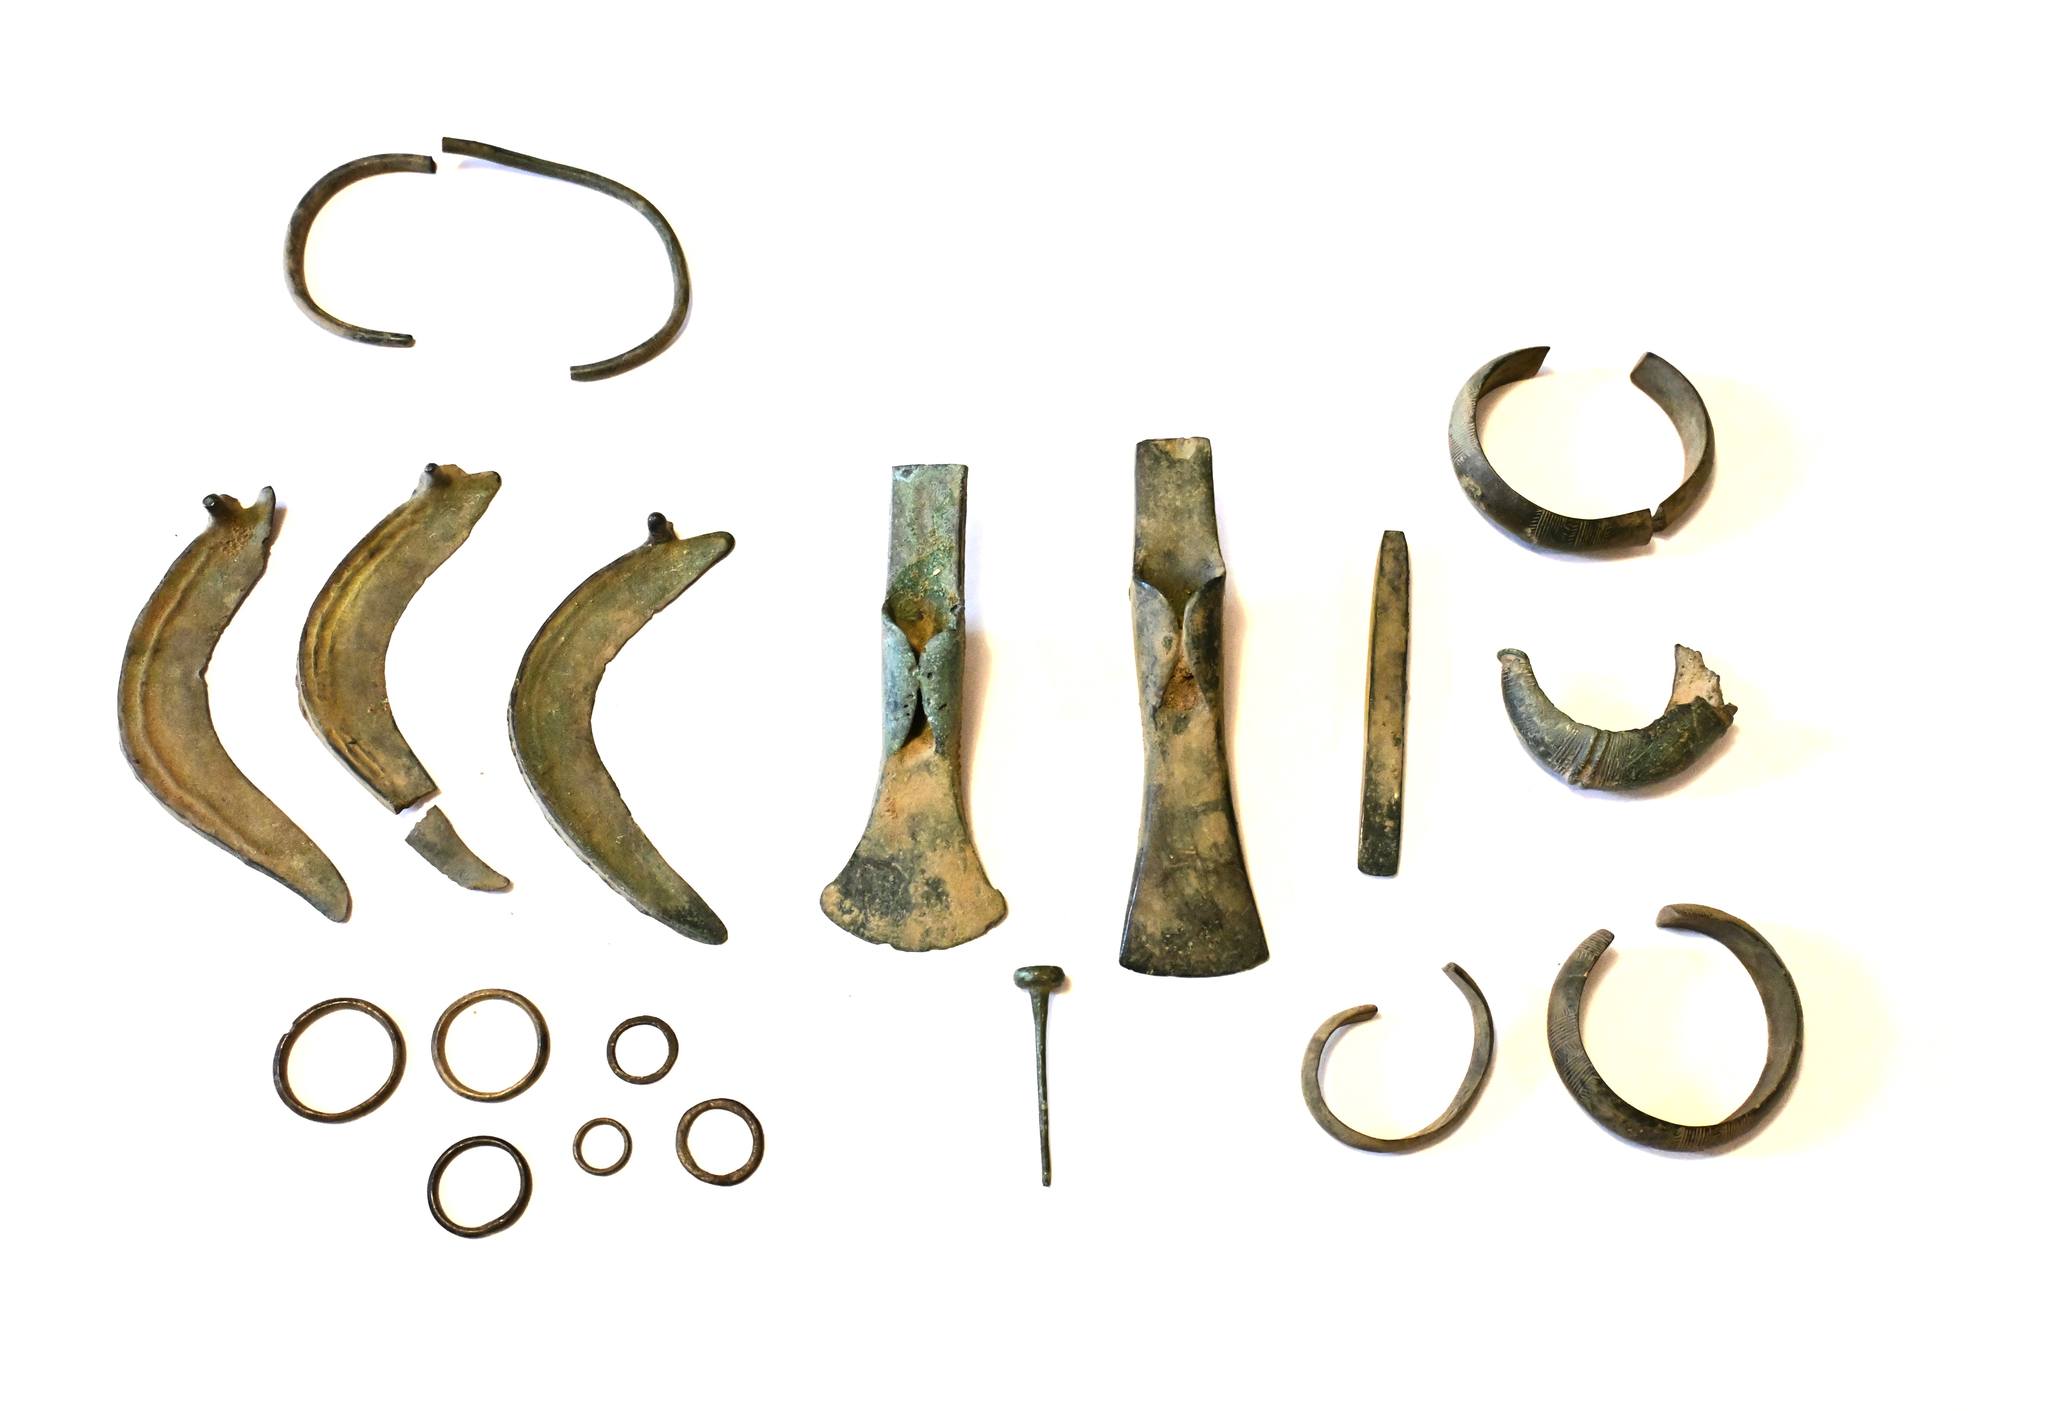 A group of detectorists discovered a treasure trove of axes, sickles and other Bronze Age objects